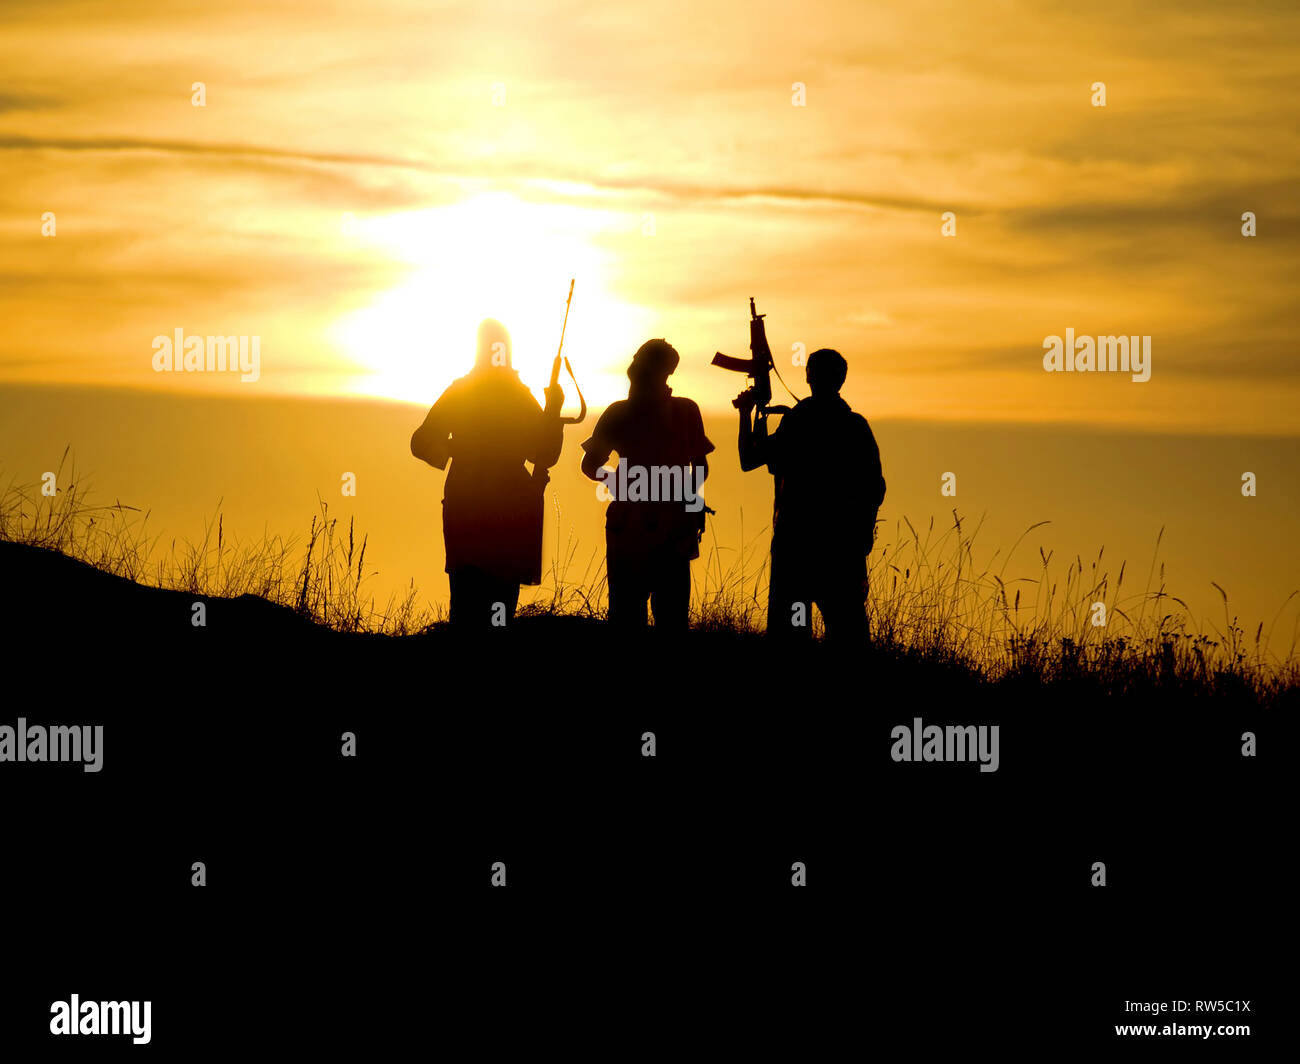 Silhouettes of several soldiers with rifles against a sunset. Stock Photo